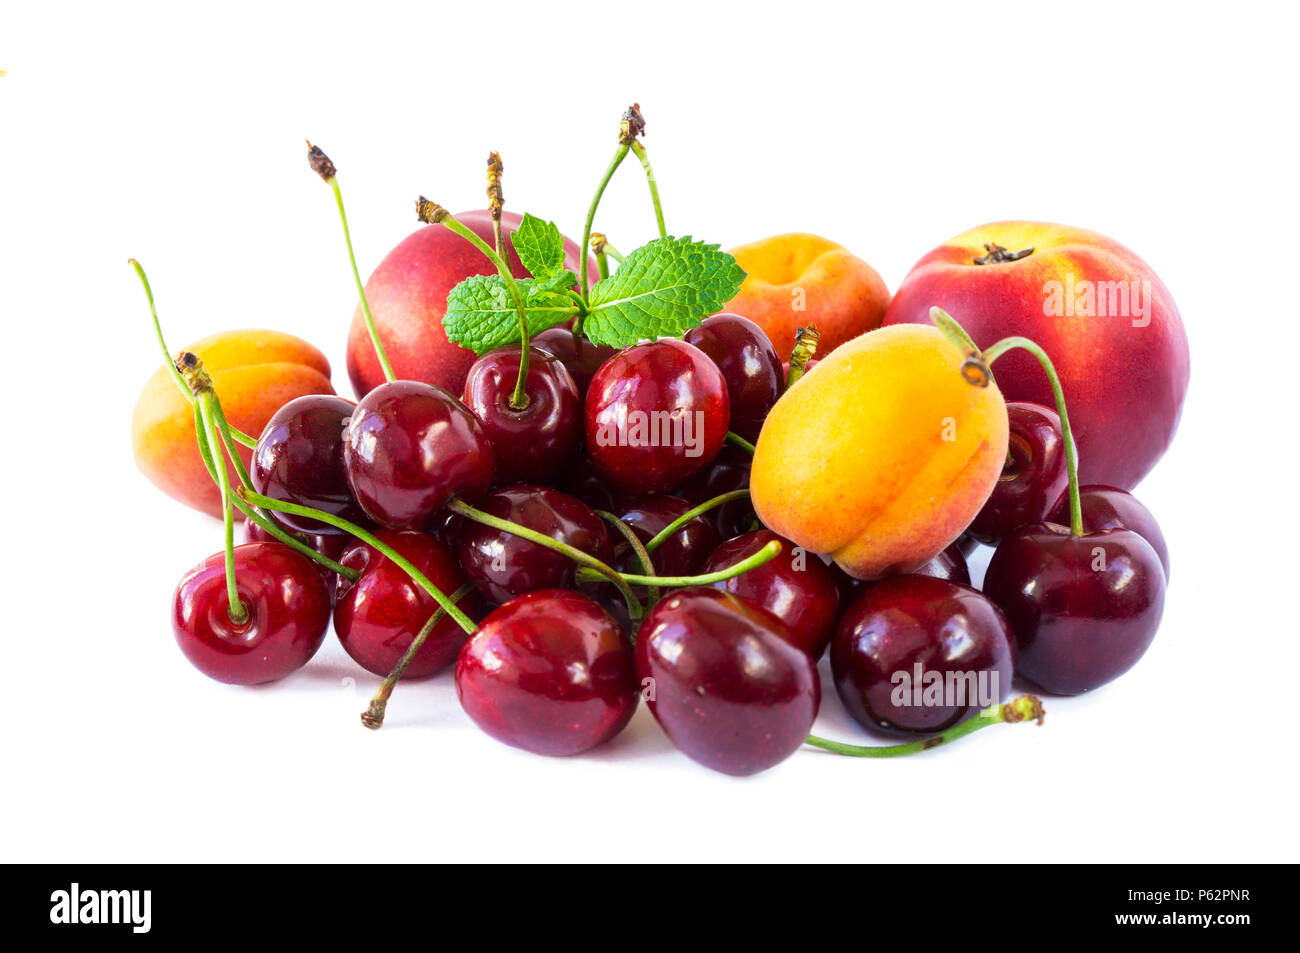 https://c8.alamy.com/comp/P62PNR/mix-fruits-isolated-on-white-background-ripe-cherries-apricots-and-nectarines-sweet-fruits-with-copy-space-for-text-various-fresh-summer-fruit-cl-P62PNR.jpg